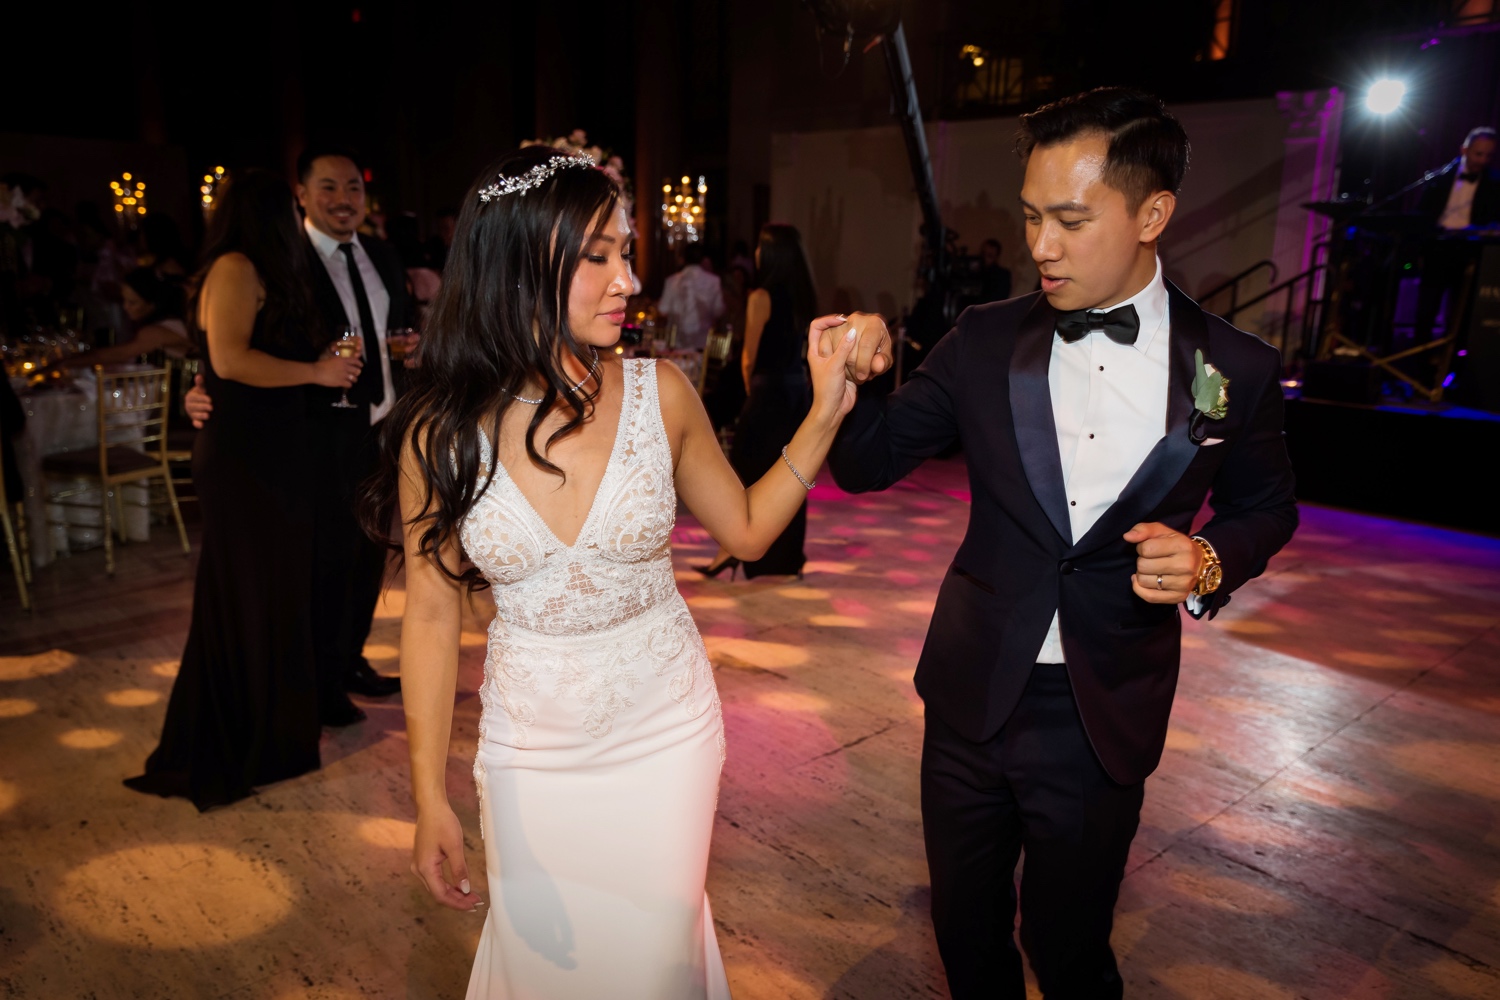 A newly wedded couple dancing together during a wedding reception 